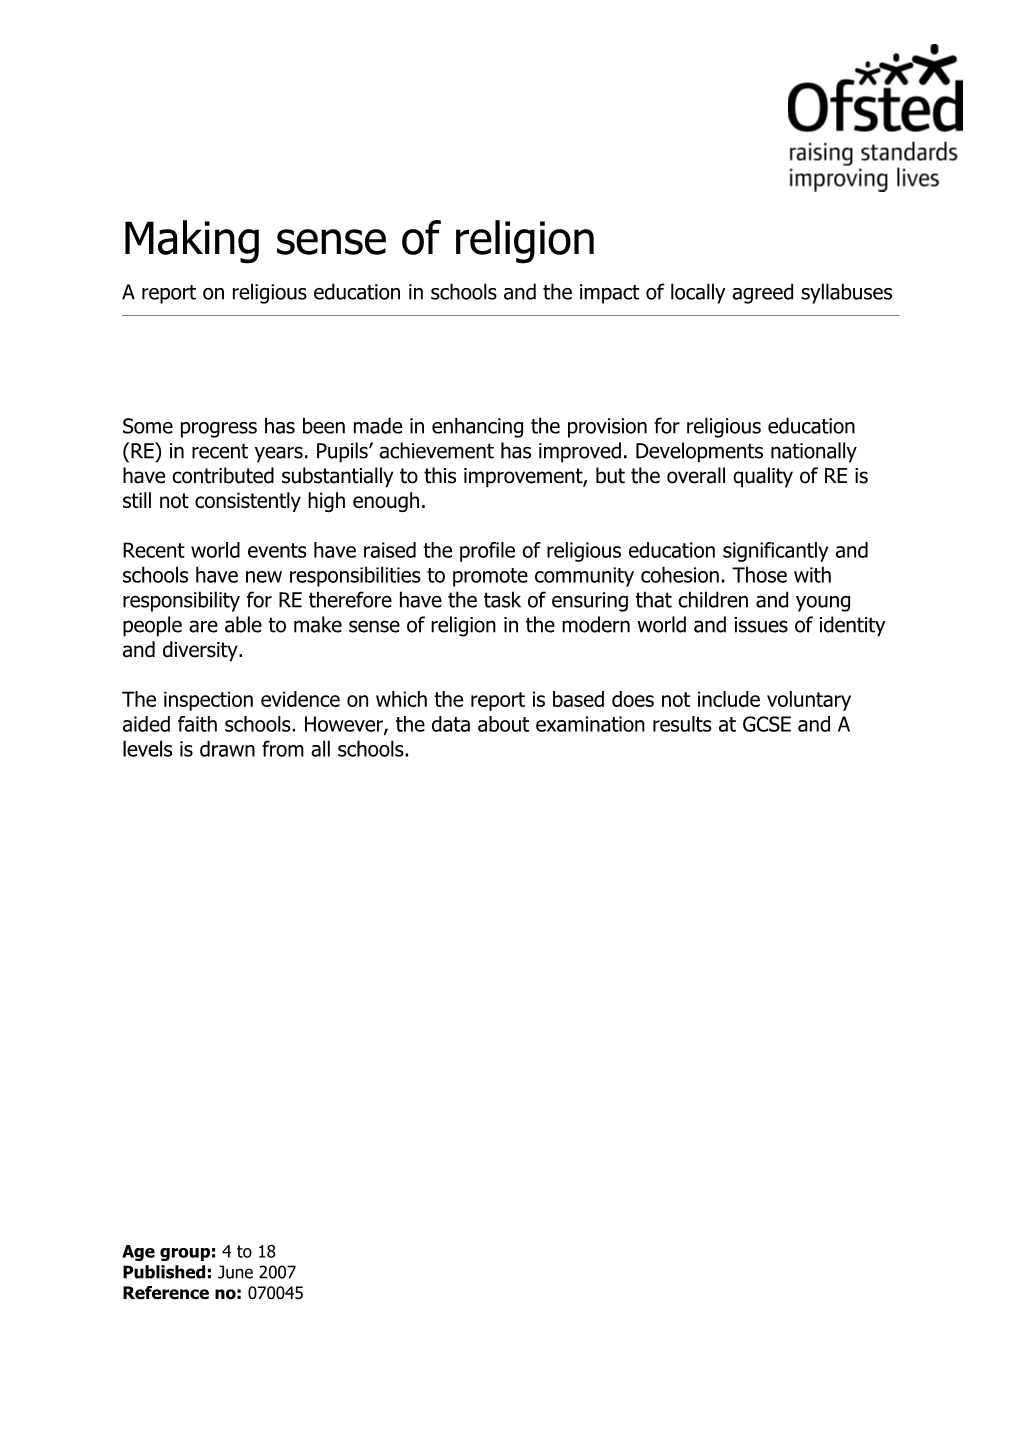 A Report on Religious Education in Schools and the Impact of Locally Agreed Syllabuses